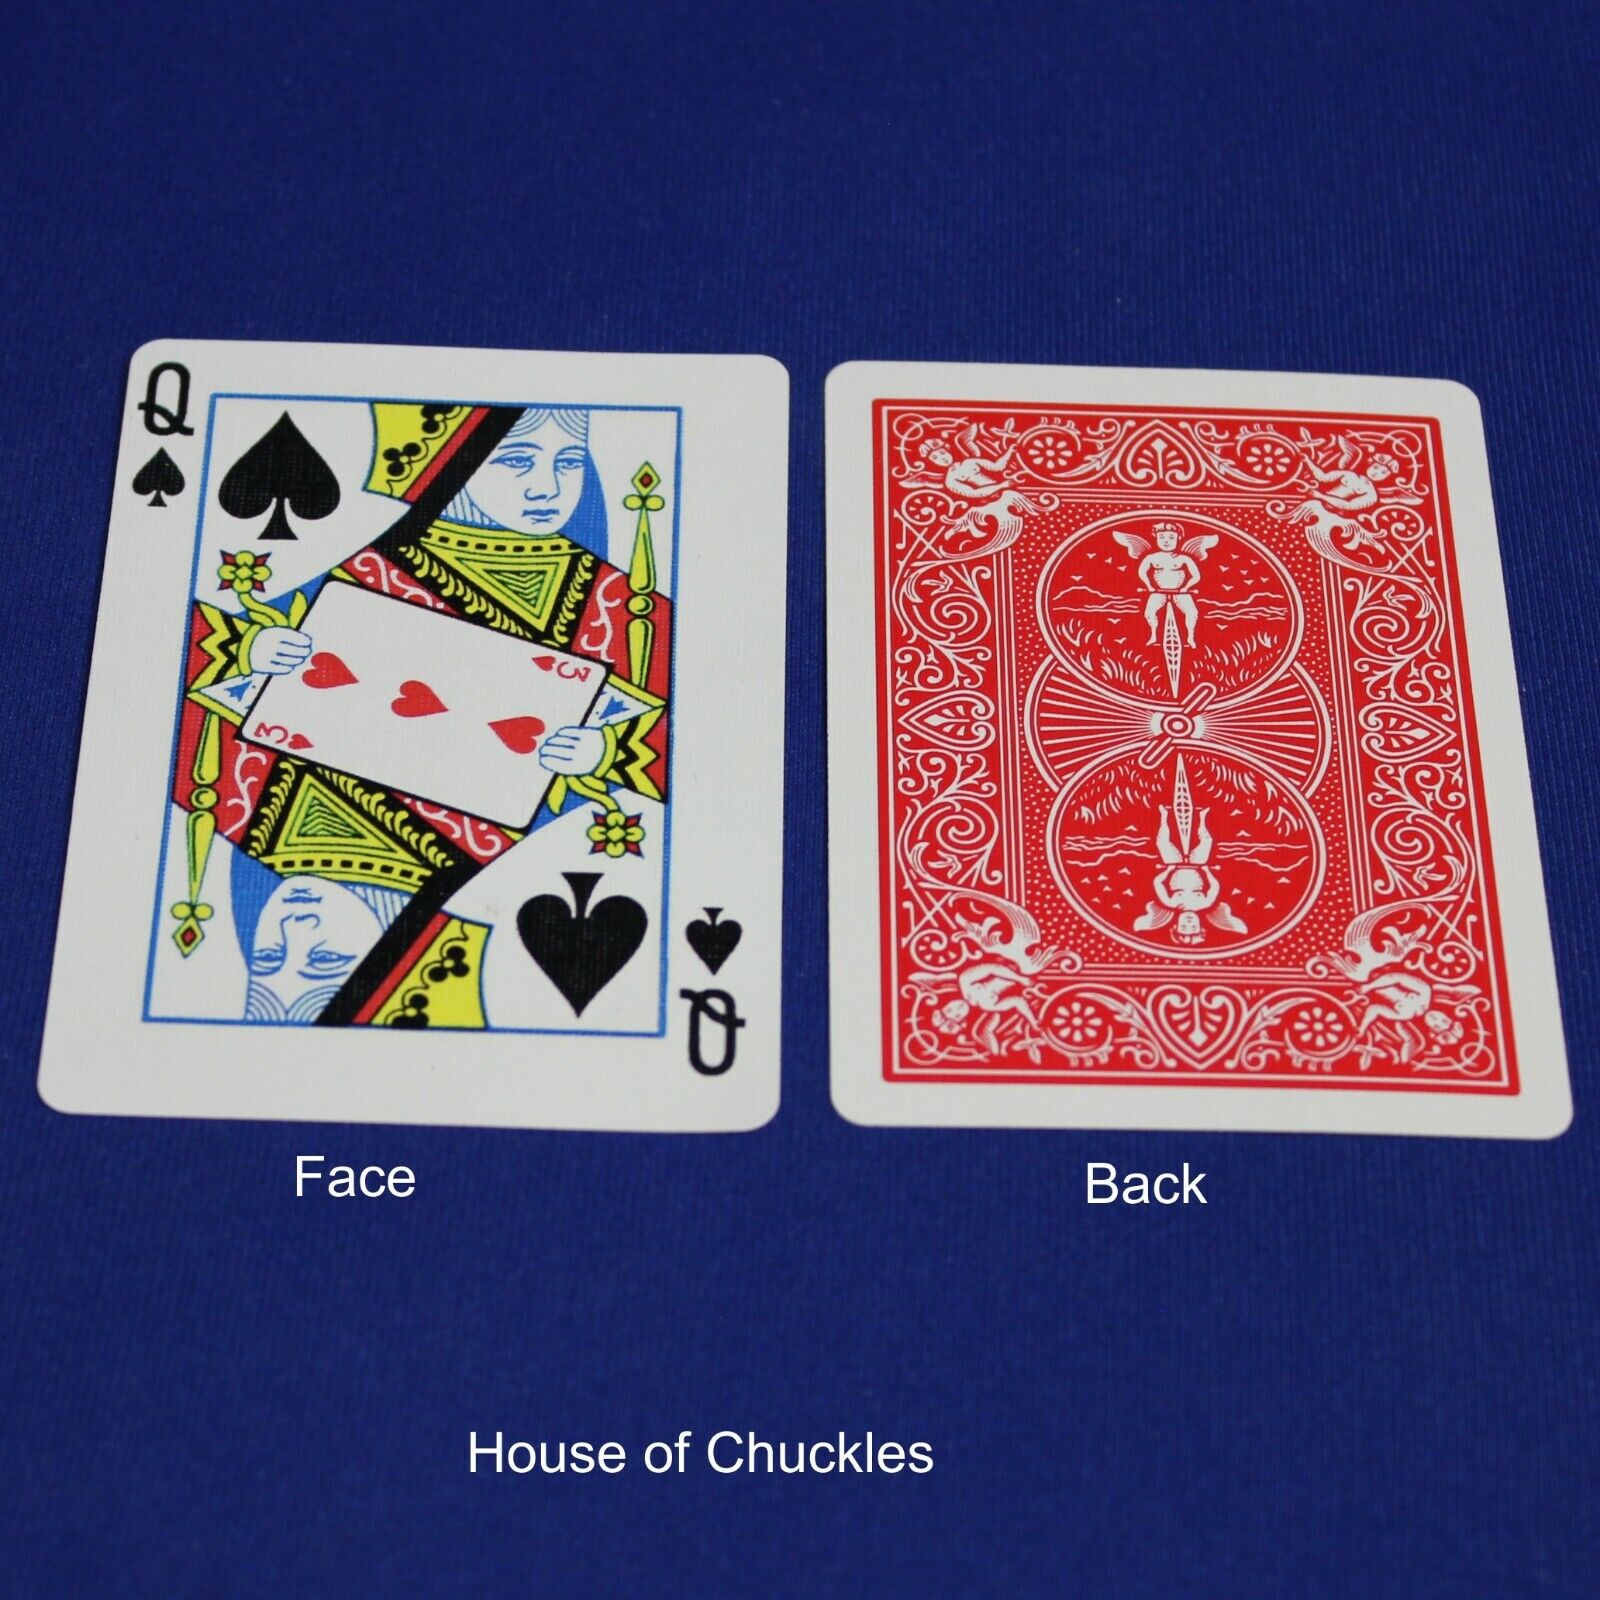 Queen Spades reveals 3 of Hearts - OFFICIAL - Red Back Bicycle Gaff Playing Card